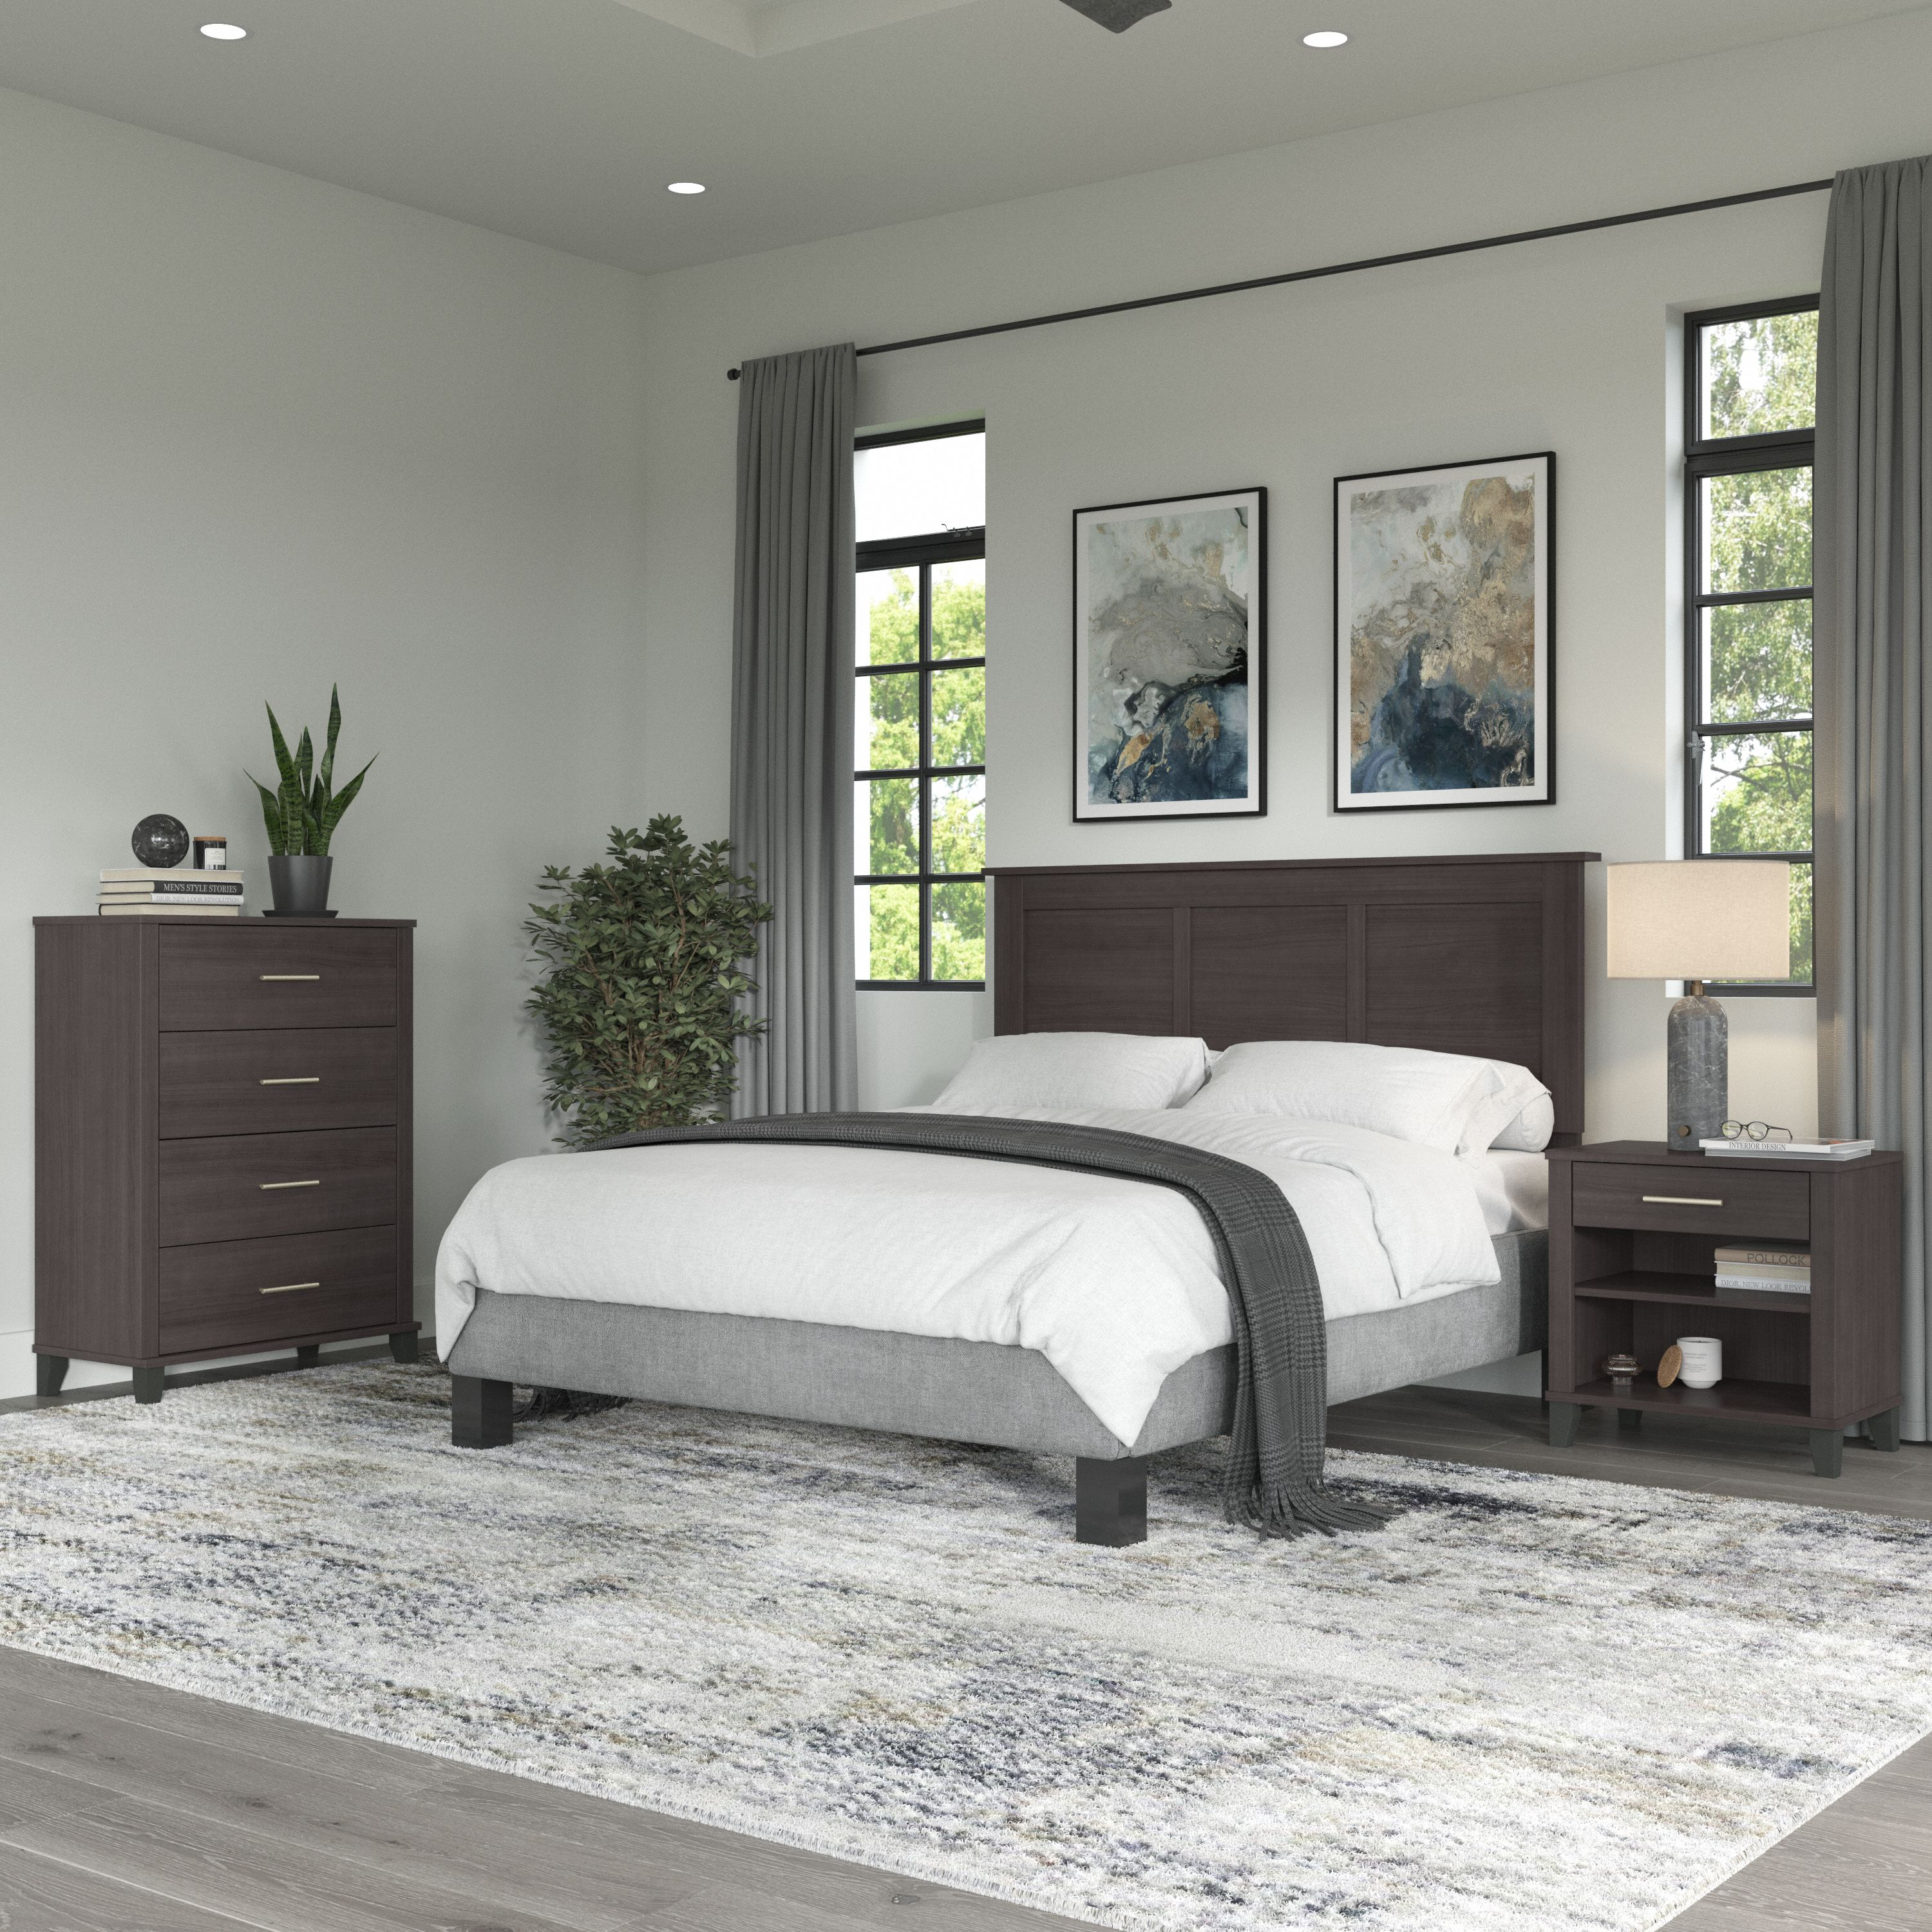 Shop Bush Furniture Somerset Full/Queen Size Headboard, Chest of Drawers and Nightstand Bedroom Set 01 SET005SG #color_storm gray